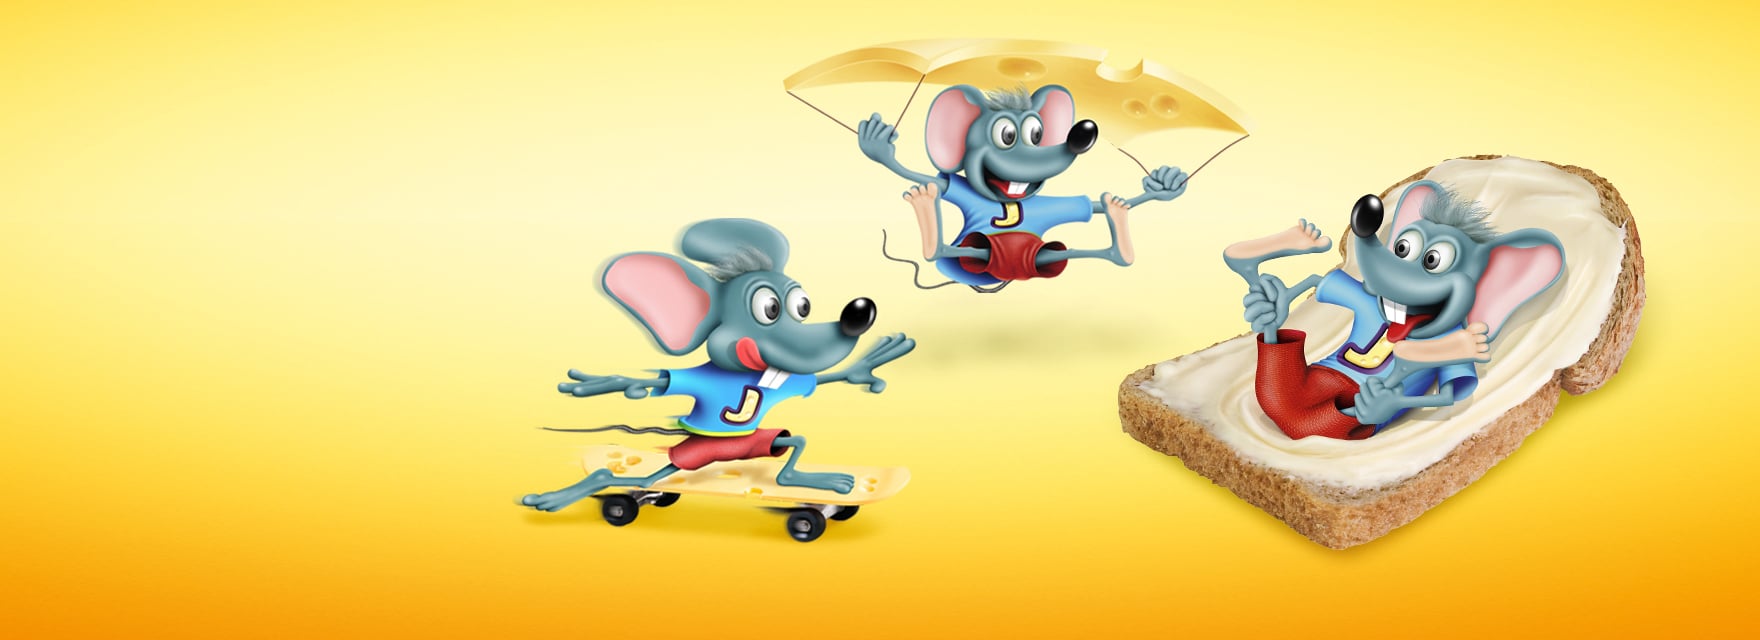 Have you met Jimmy the Mouse?